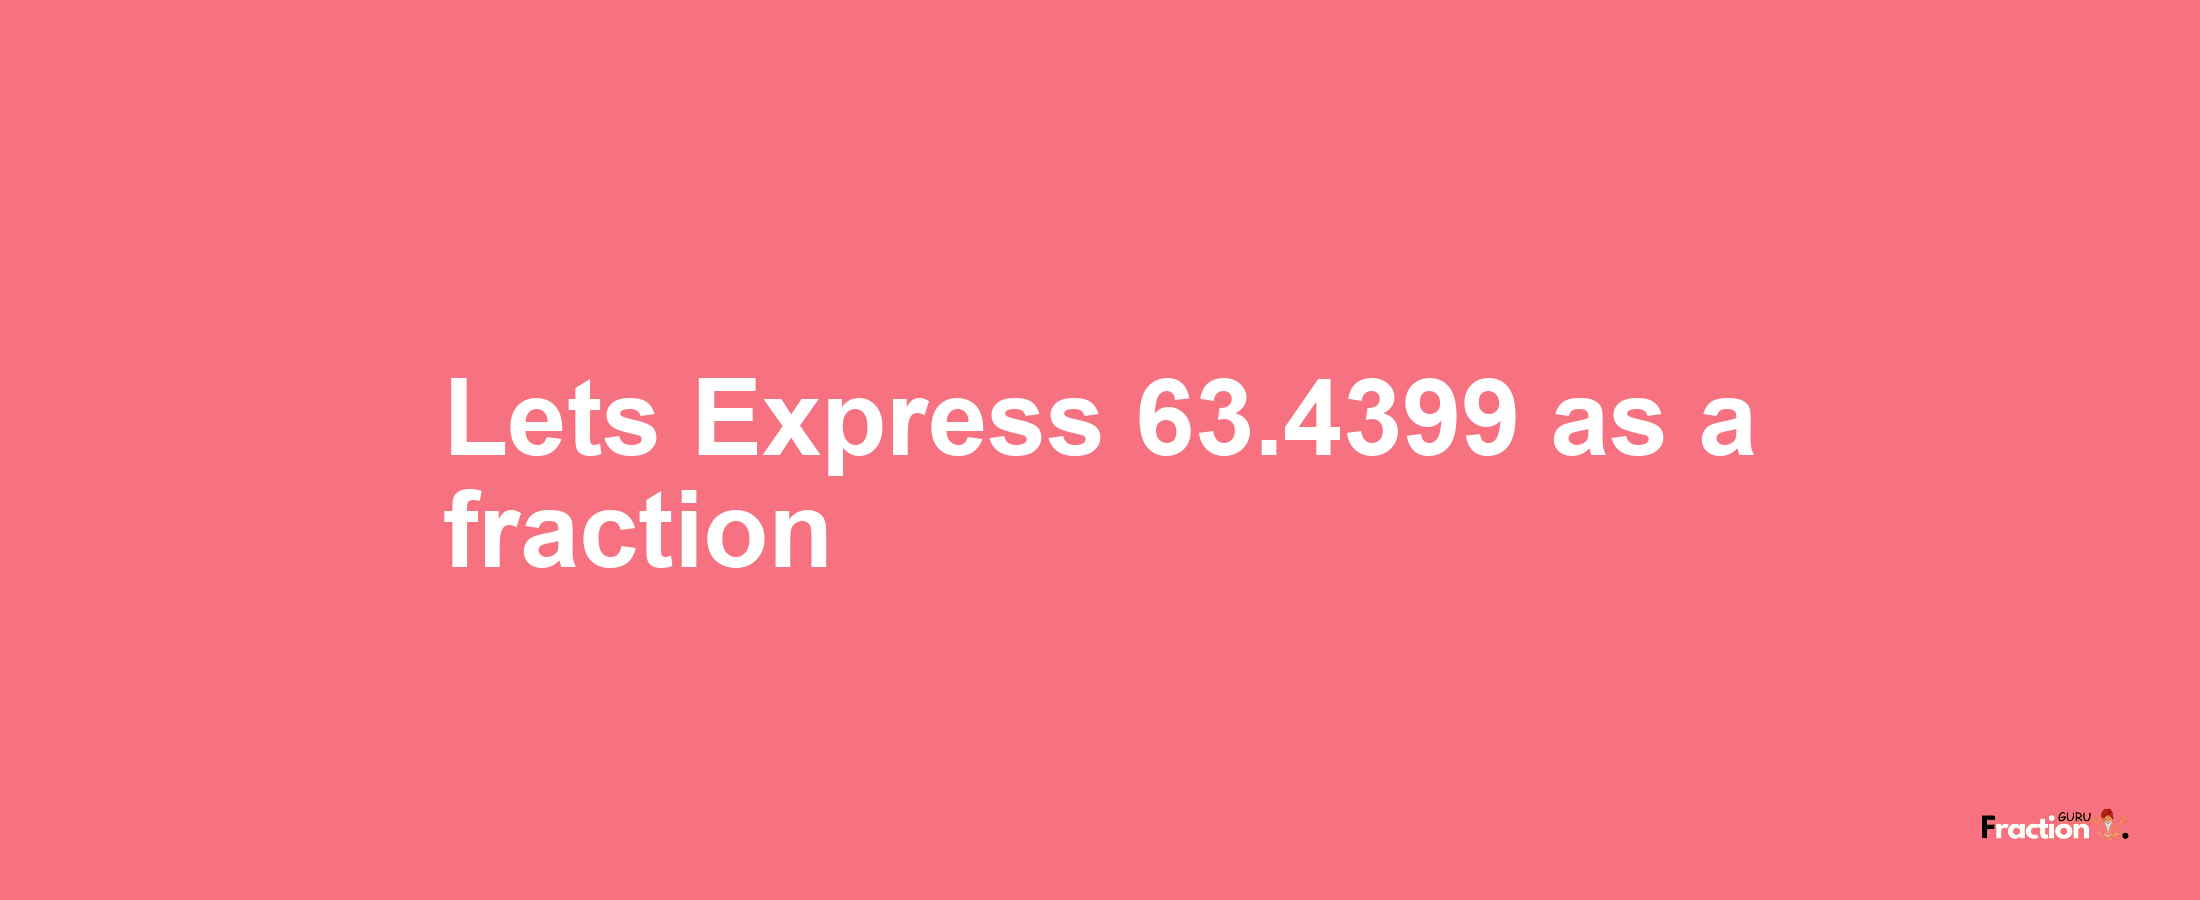 Lets Express 63.4399 as afraction